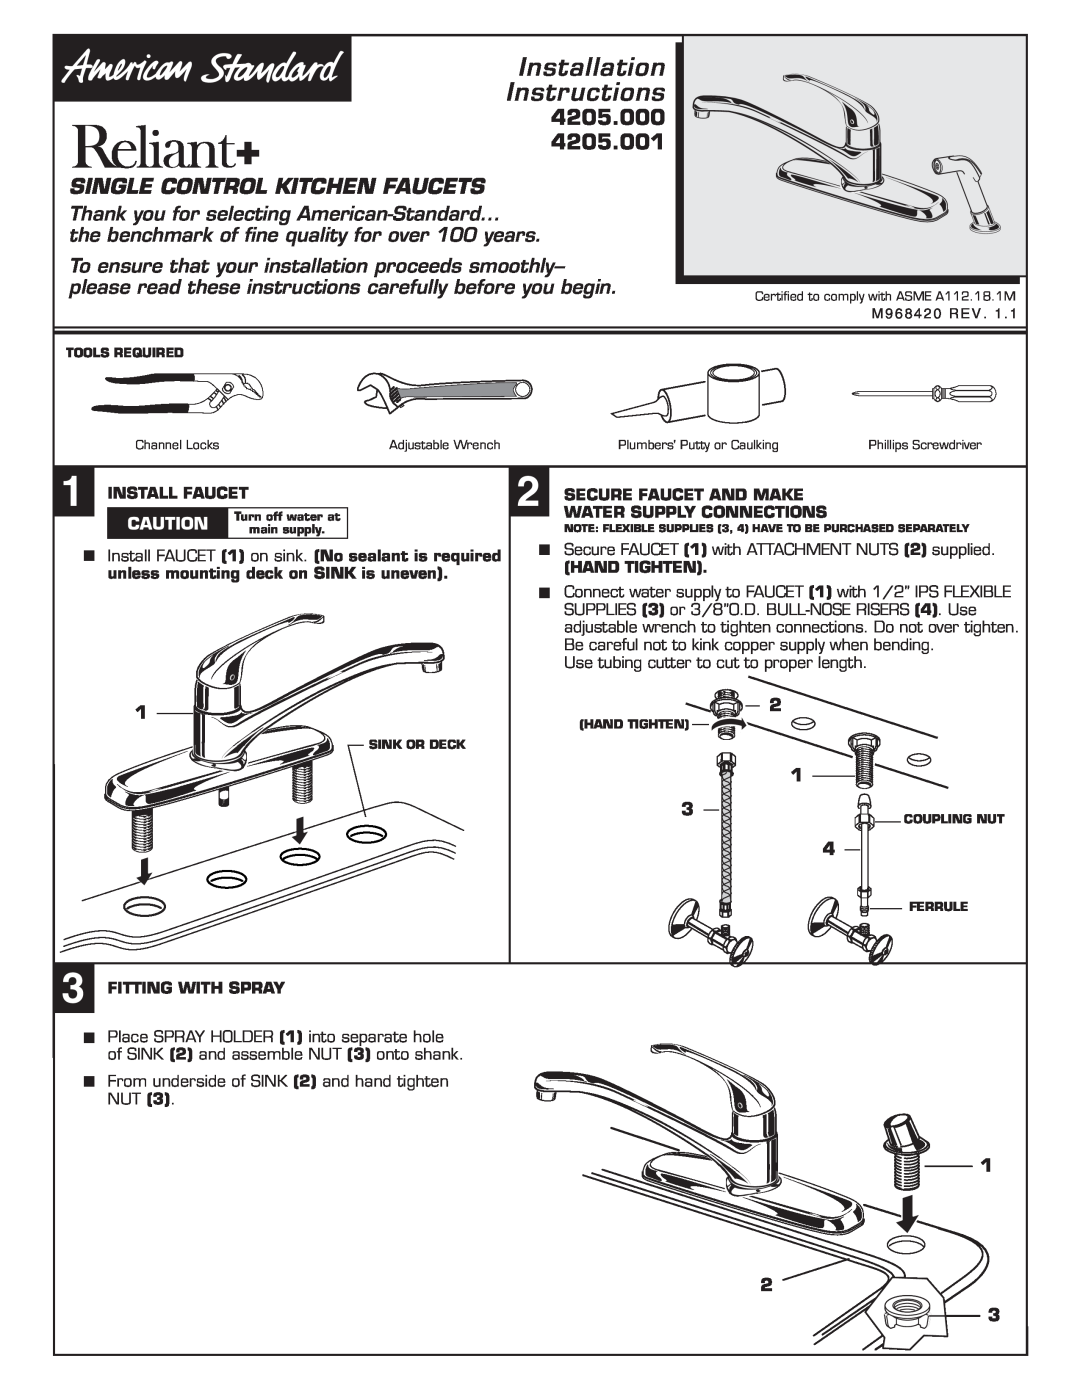 American Standard 4205.000 installation instructions Install Faucet, Secure Faucet And Make Water Supply Connections 